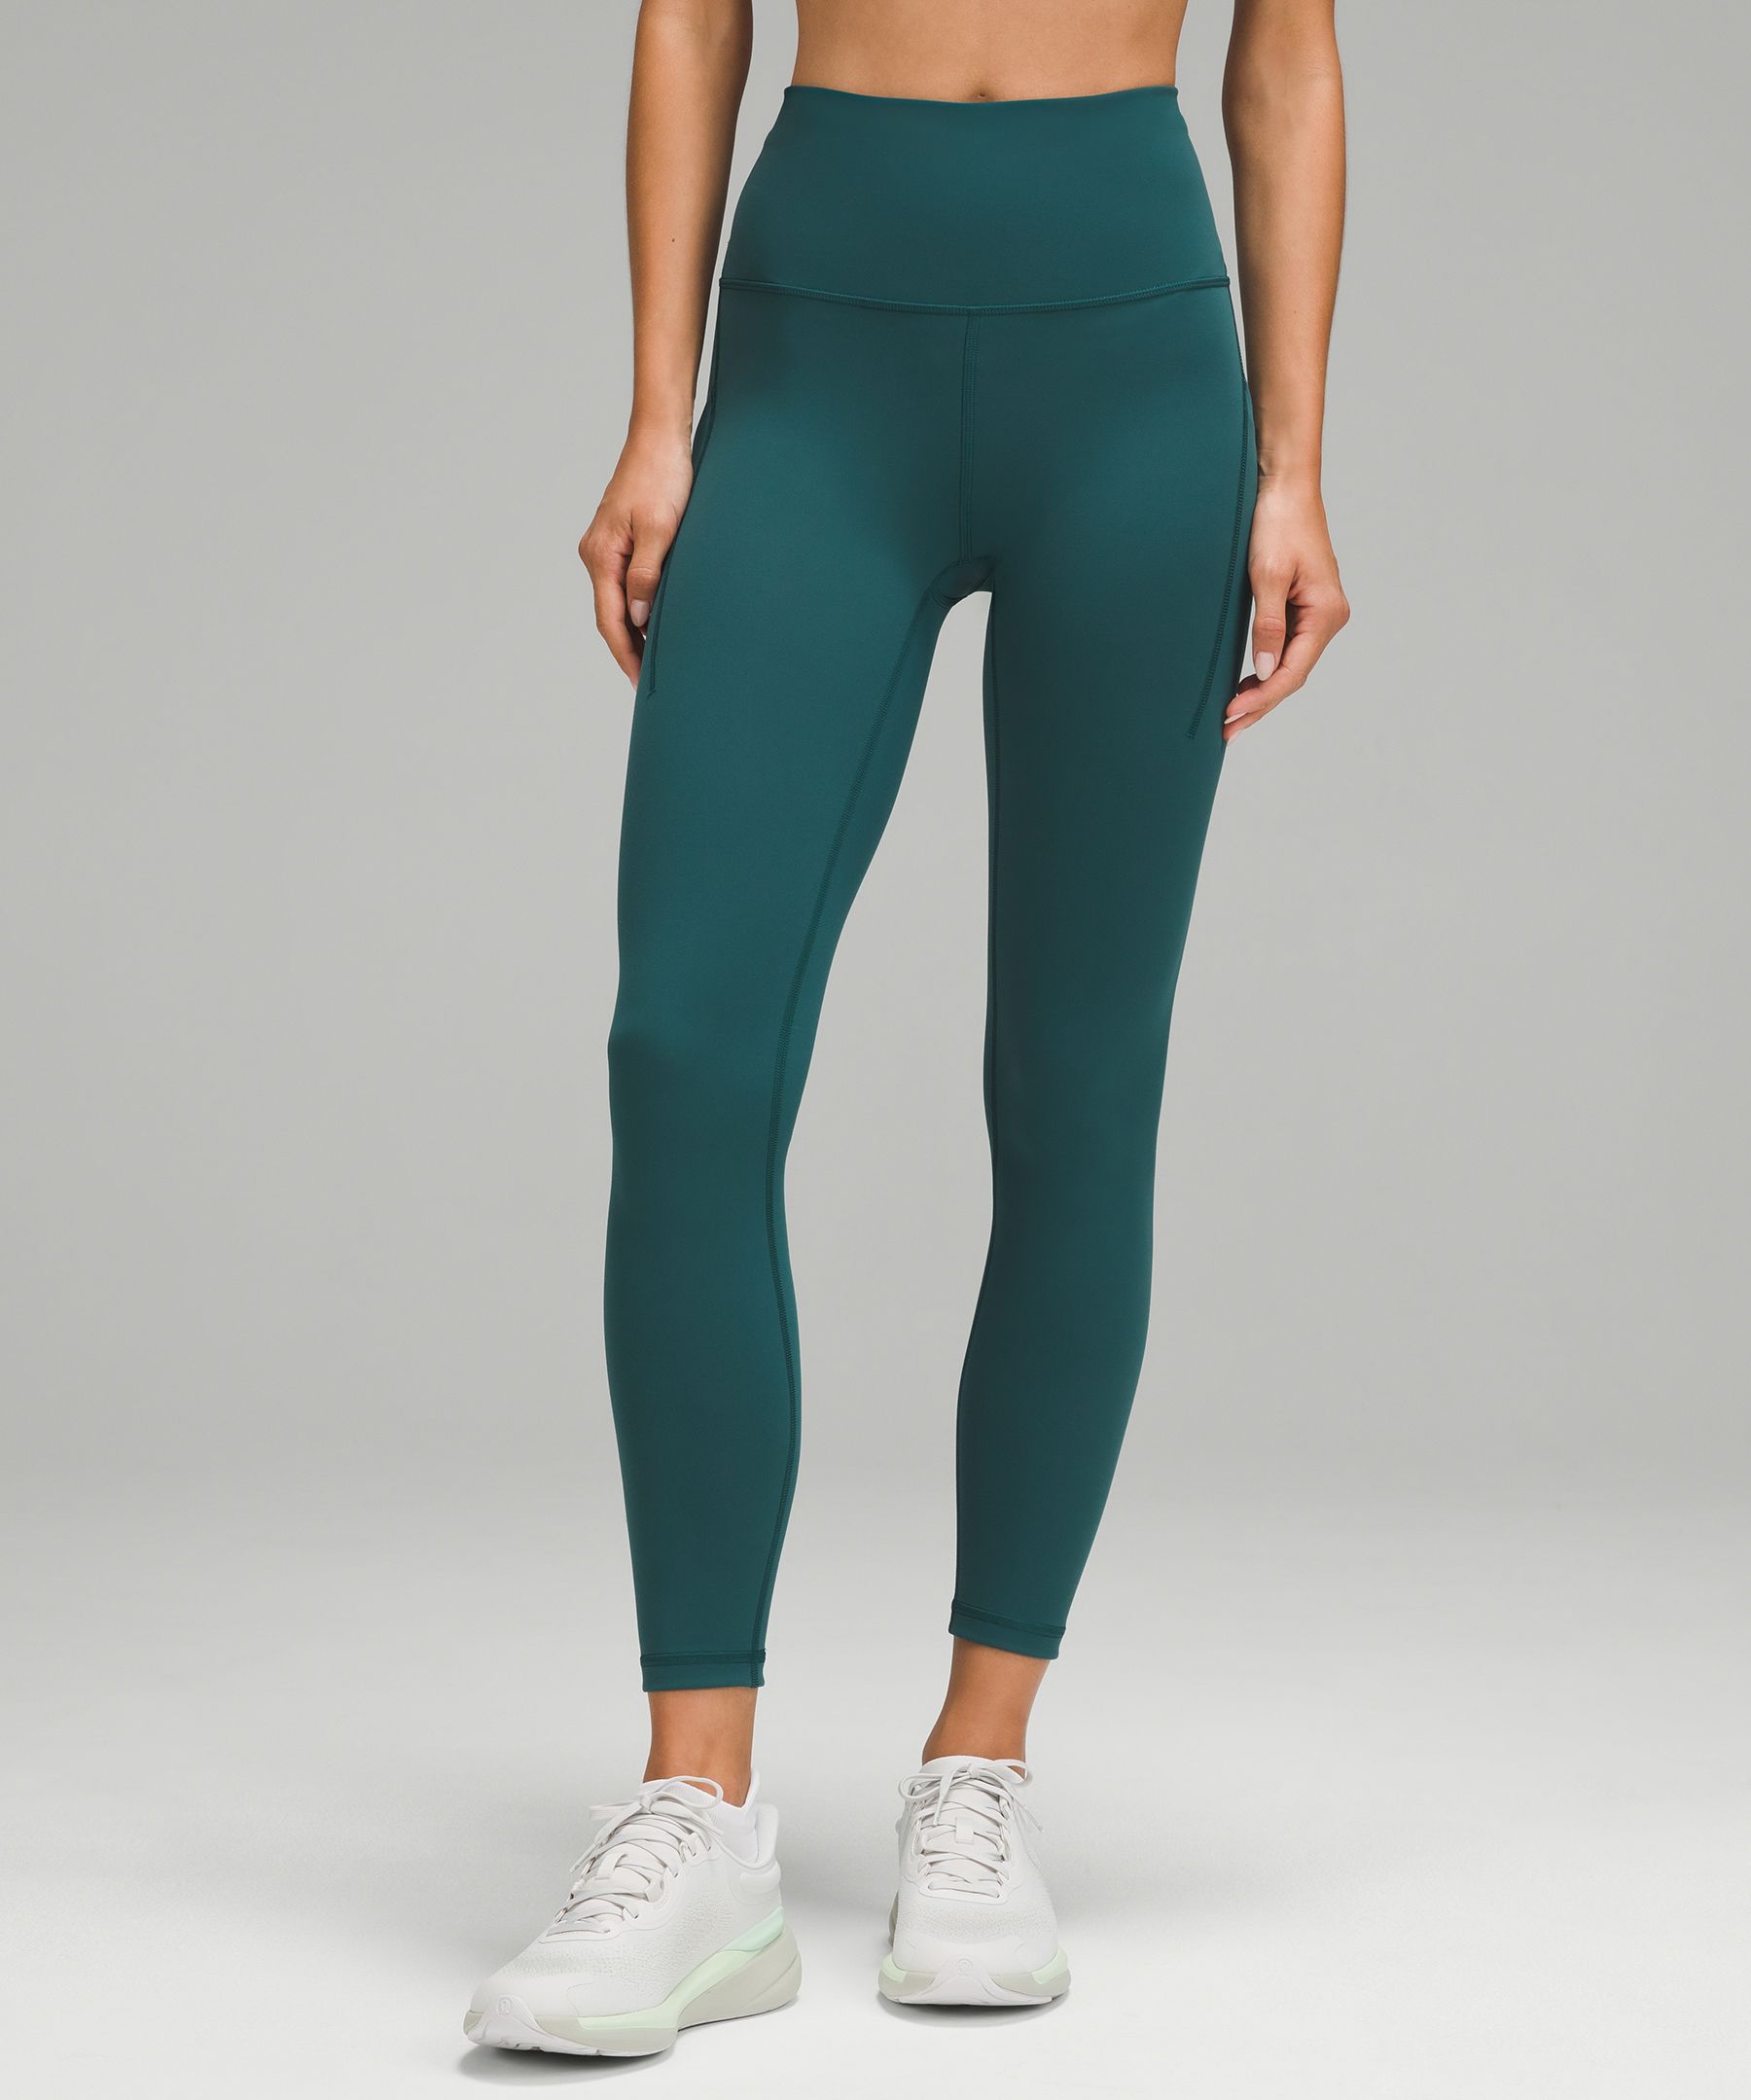 lululemon Review: Entwined Hi-Rise Wunder Under Pant in Nulux